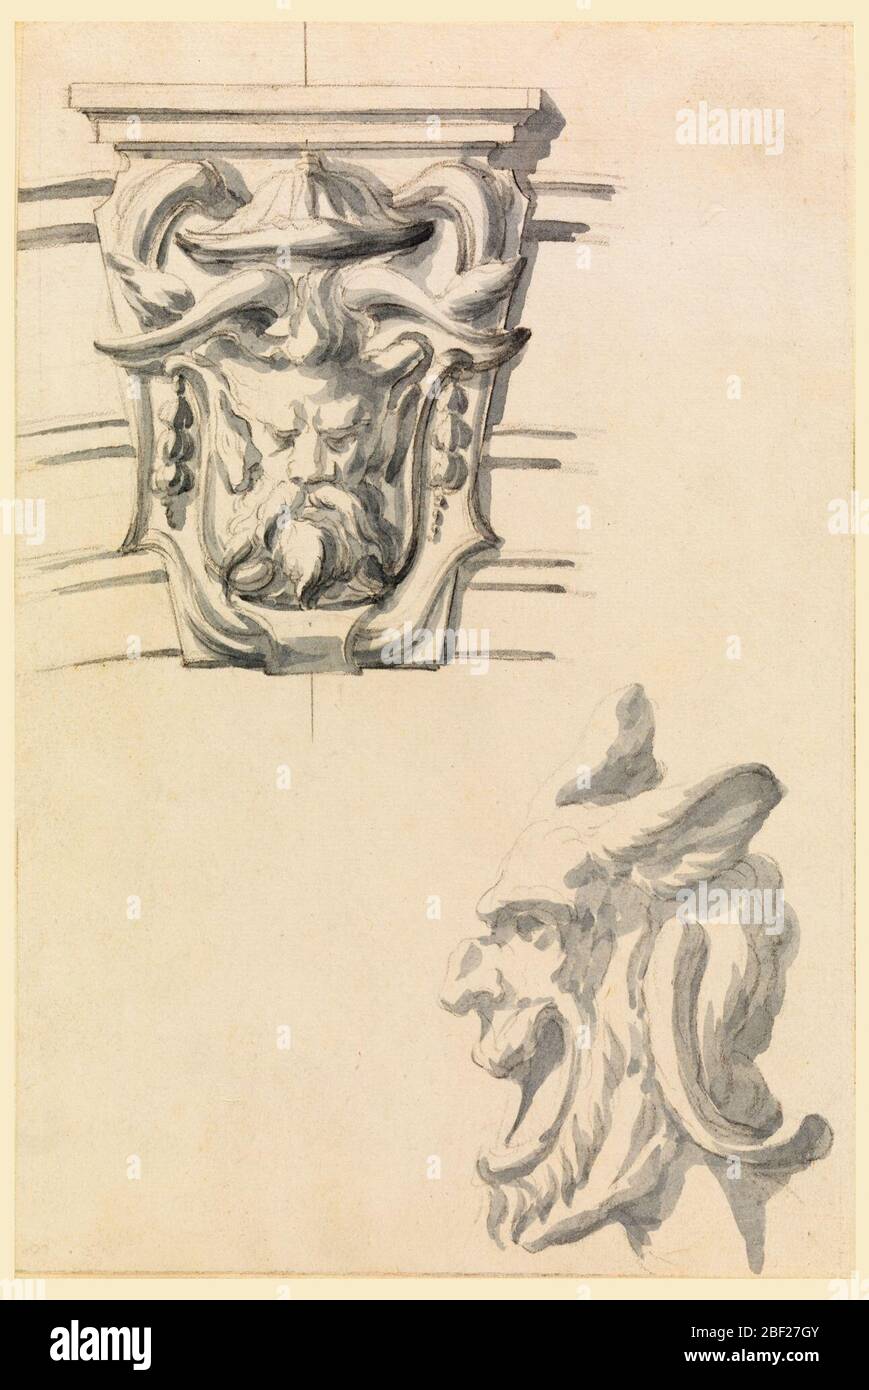 Design for a keystone and a mask. Above, the keystone with two escutcheons, the uppermost with a bearded mask with horns and donkey's ears. Laterally, the cornices of an entablature. Below, a similar mask with open mouth, seen in profile. Stock Photo